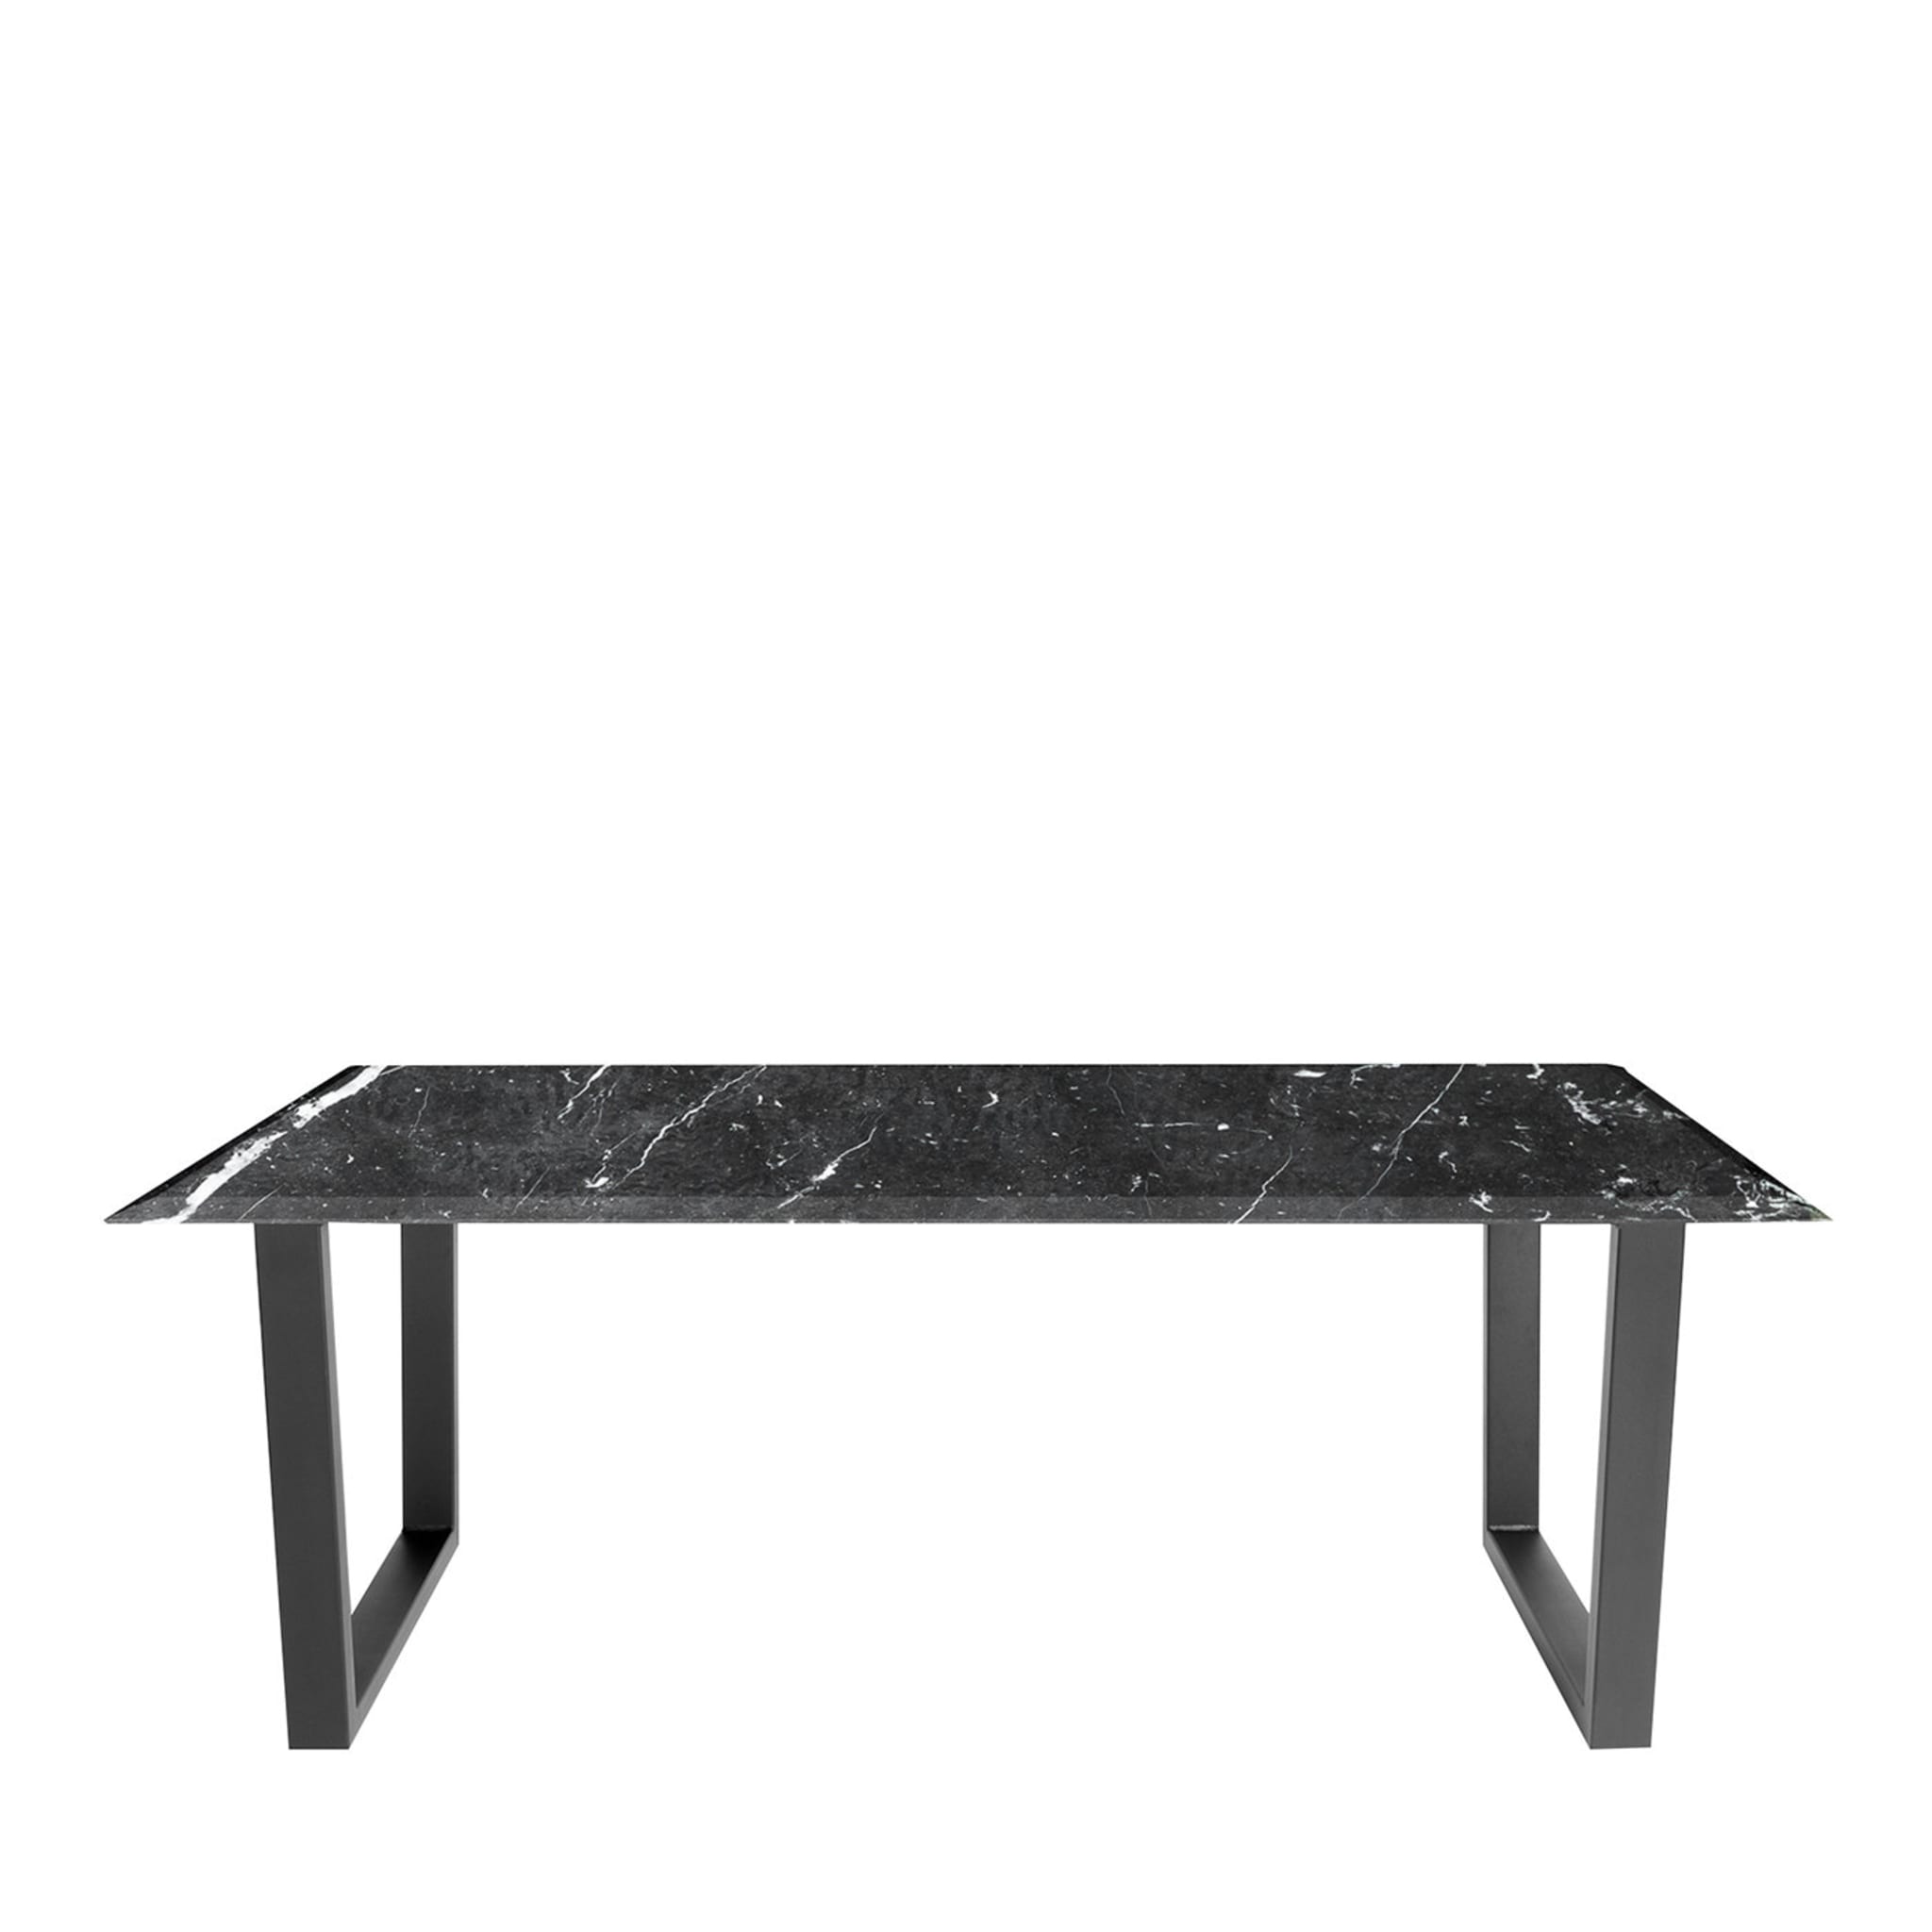 Levanzo Nero Marquina Dining Table - Main view